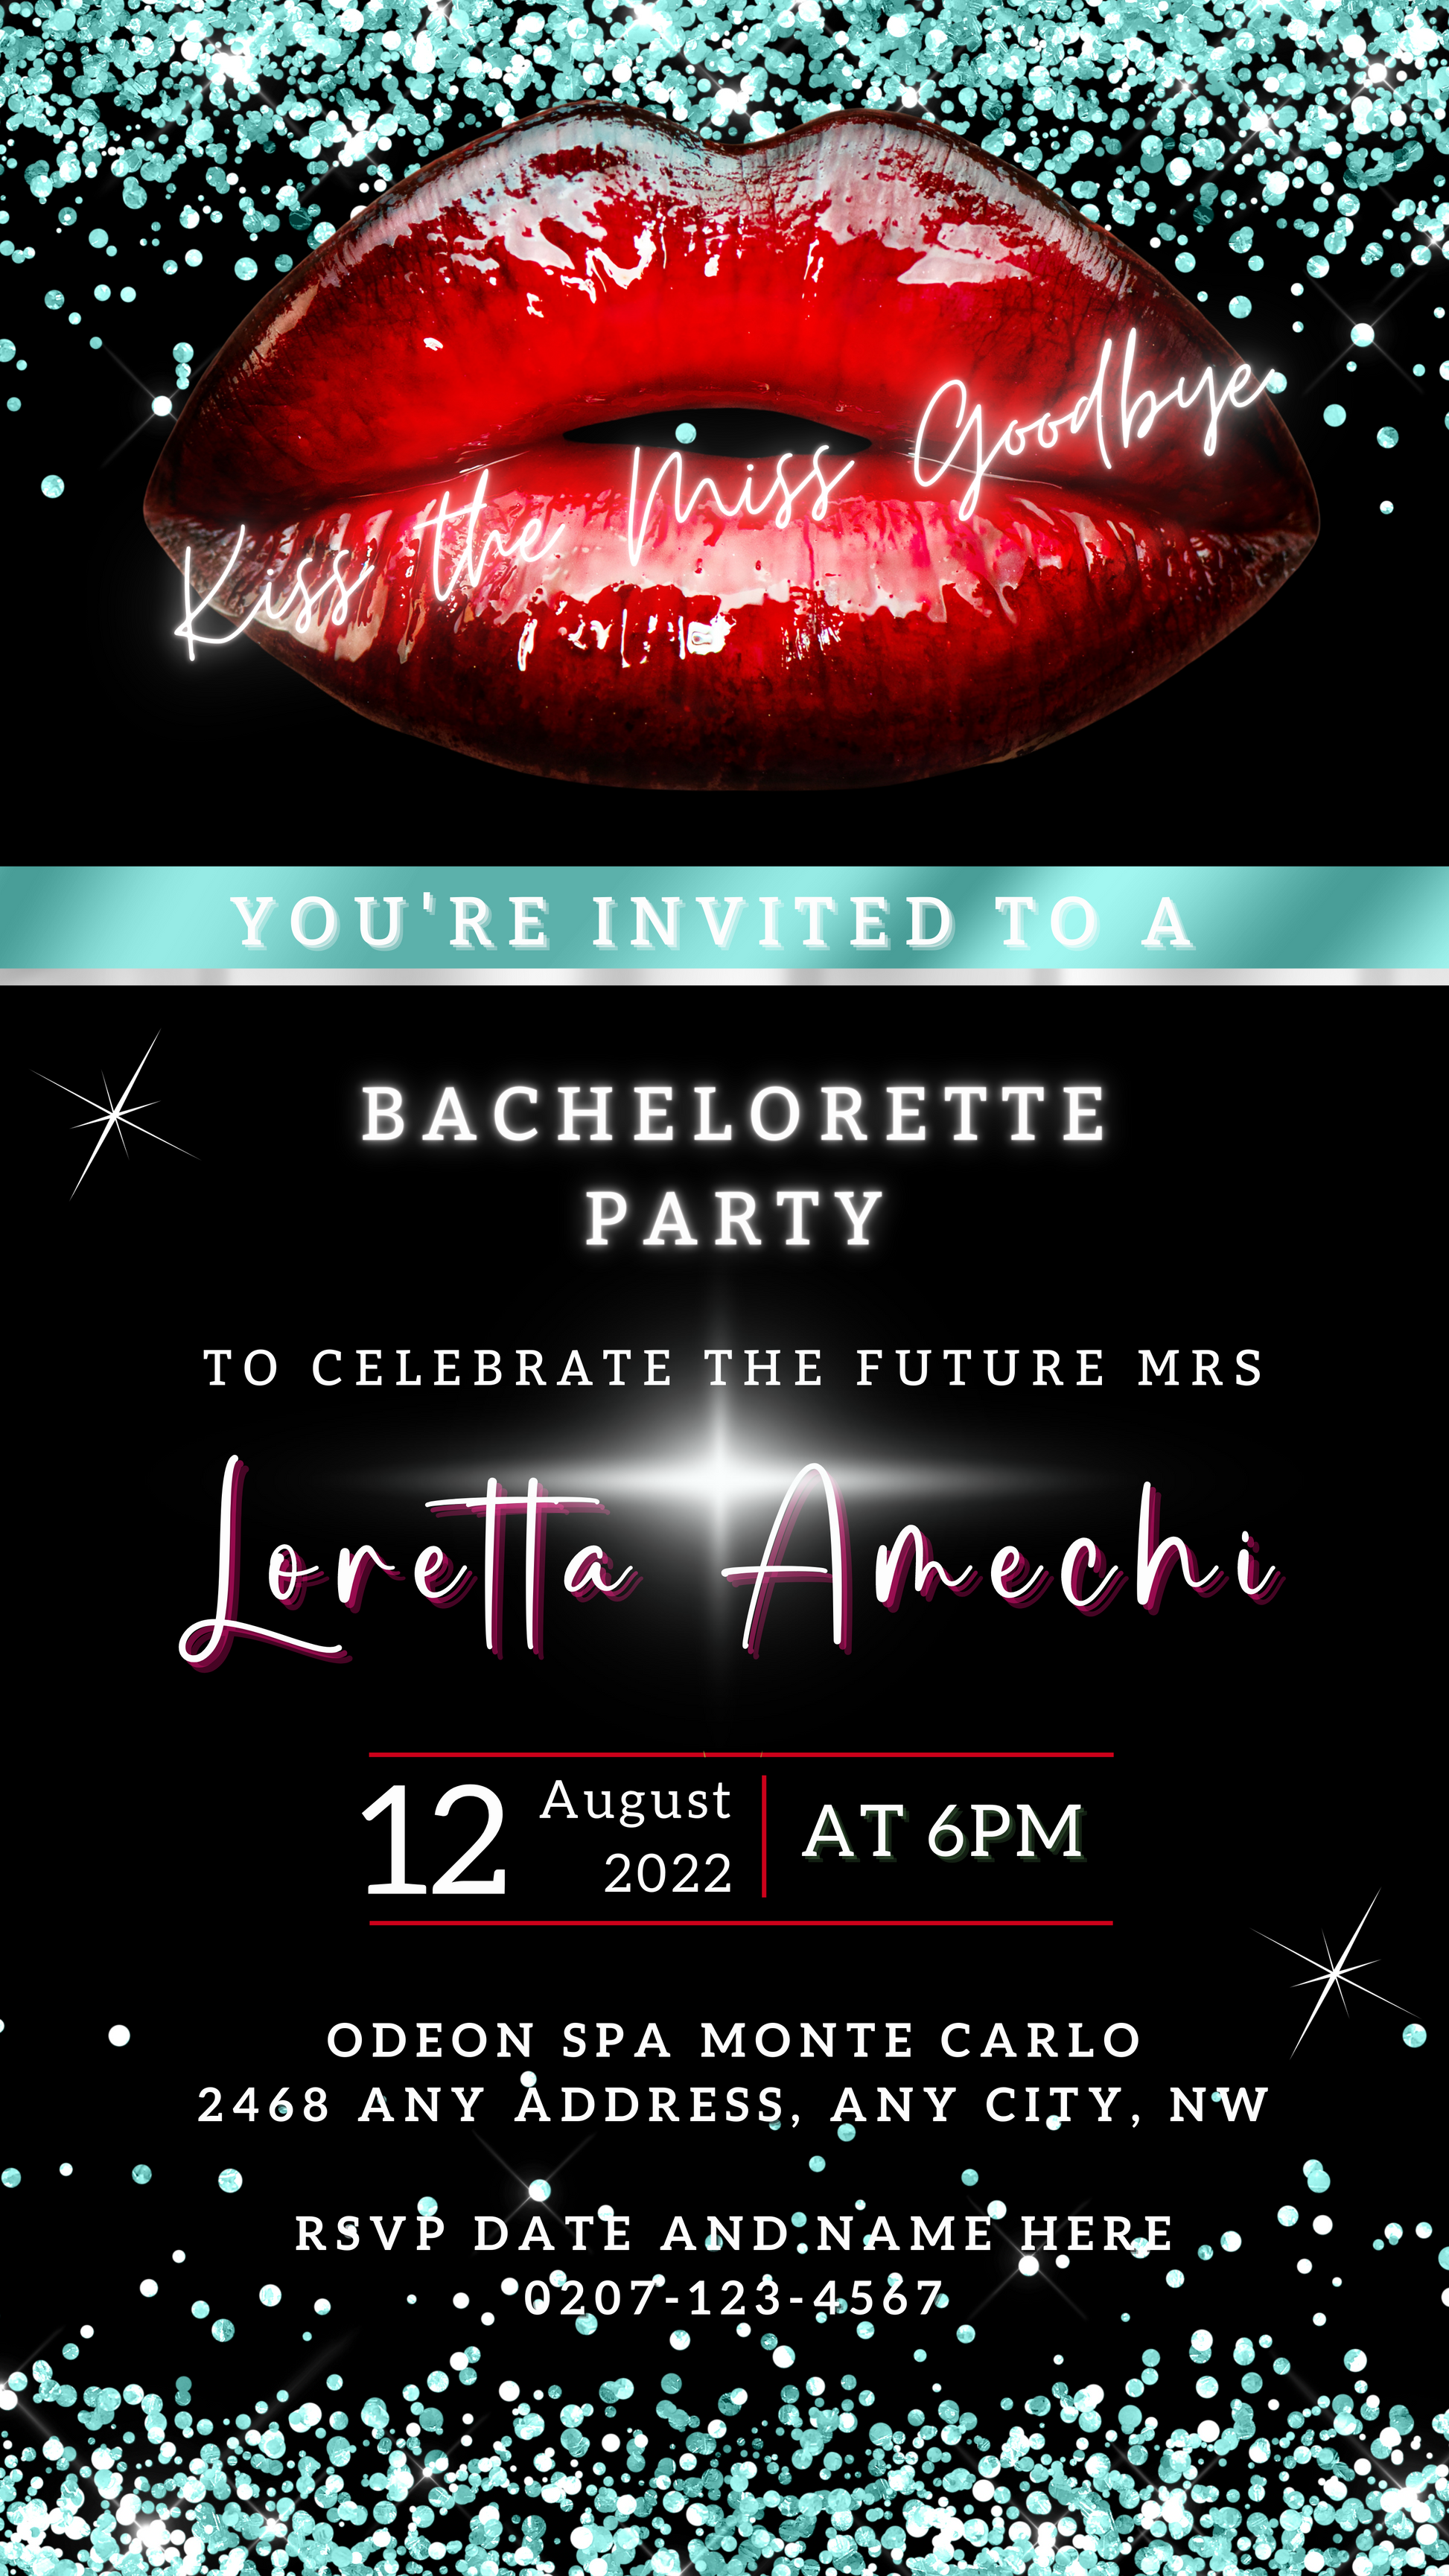 Red Hot Lips Teal Glitter Bachelorette Party Evite, featuring customizable text, lips graphic, and editable template for digital invitations using Canva.